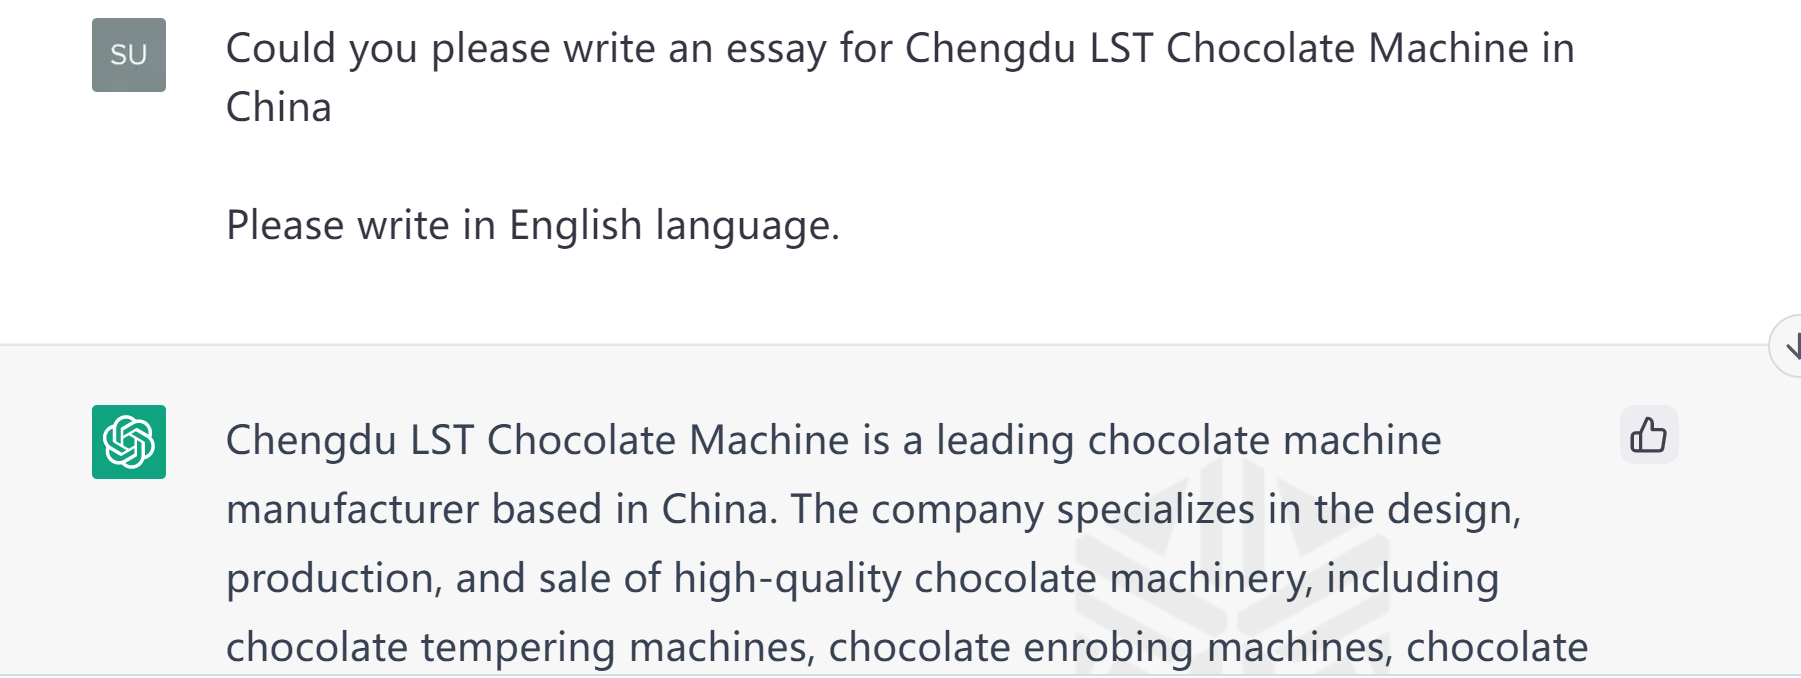 How does AI ChatGPT evaluate Chengdu LST Chocolate Machine